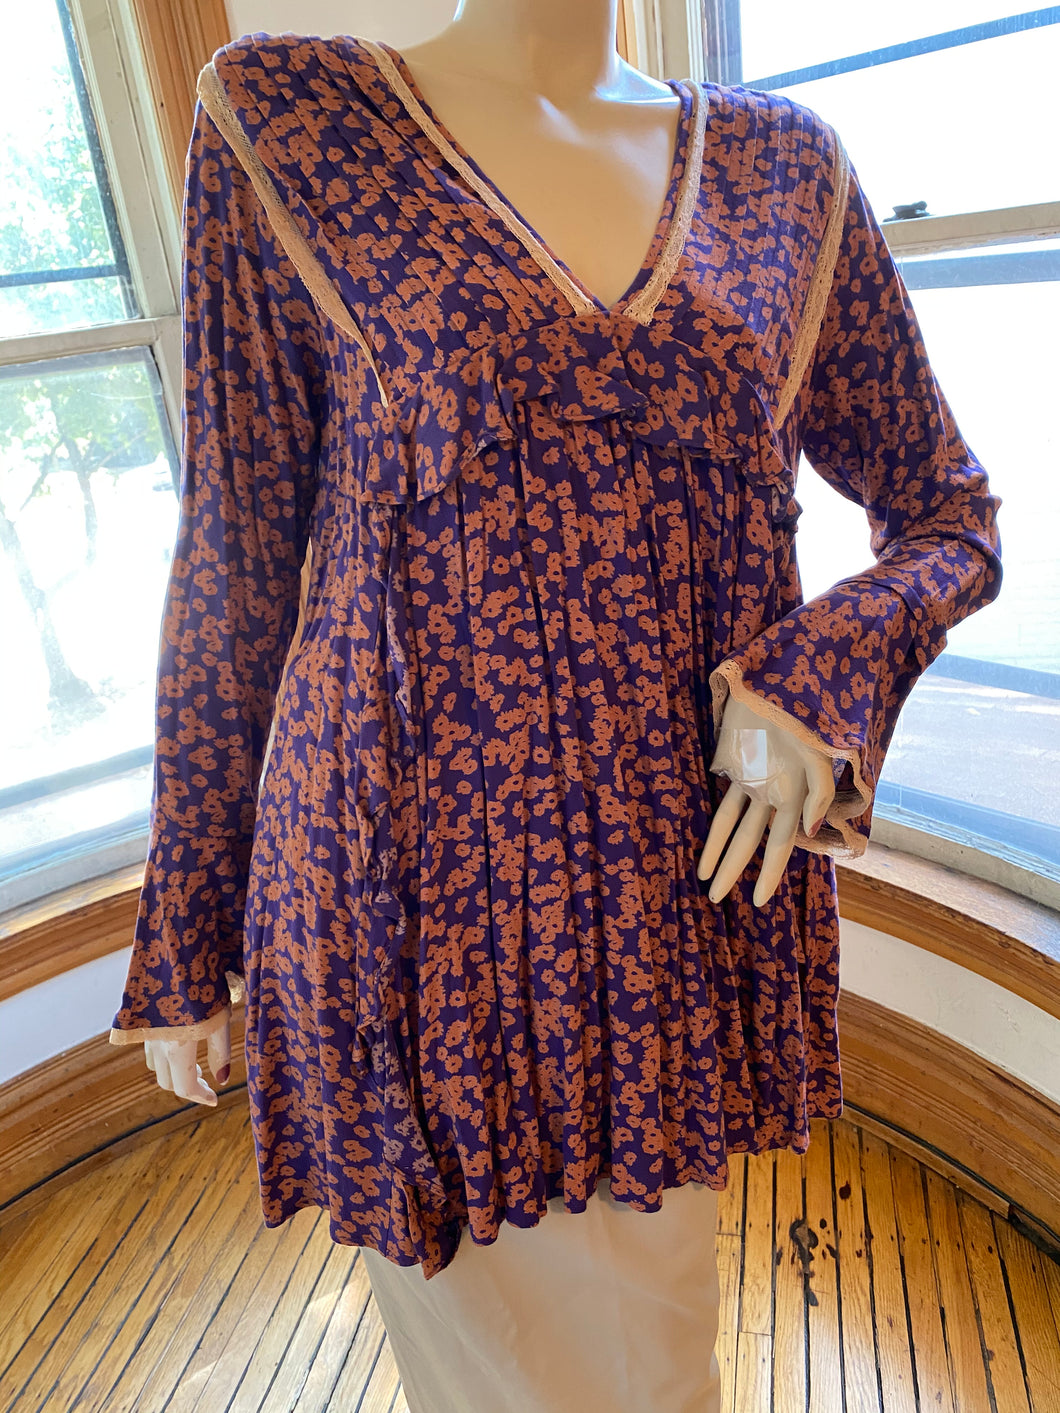 Free People Orange/Purple Rayon Print Top with Lace Trims, size S